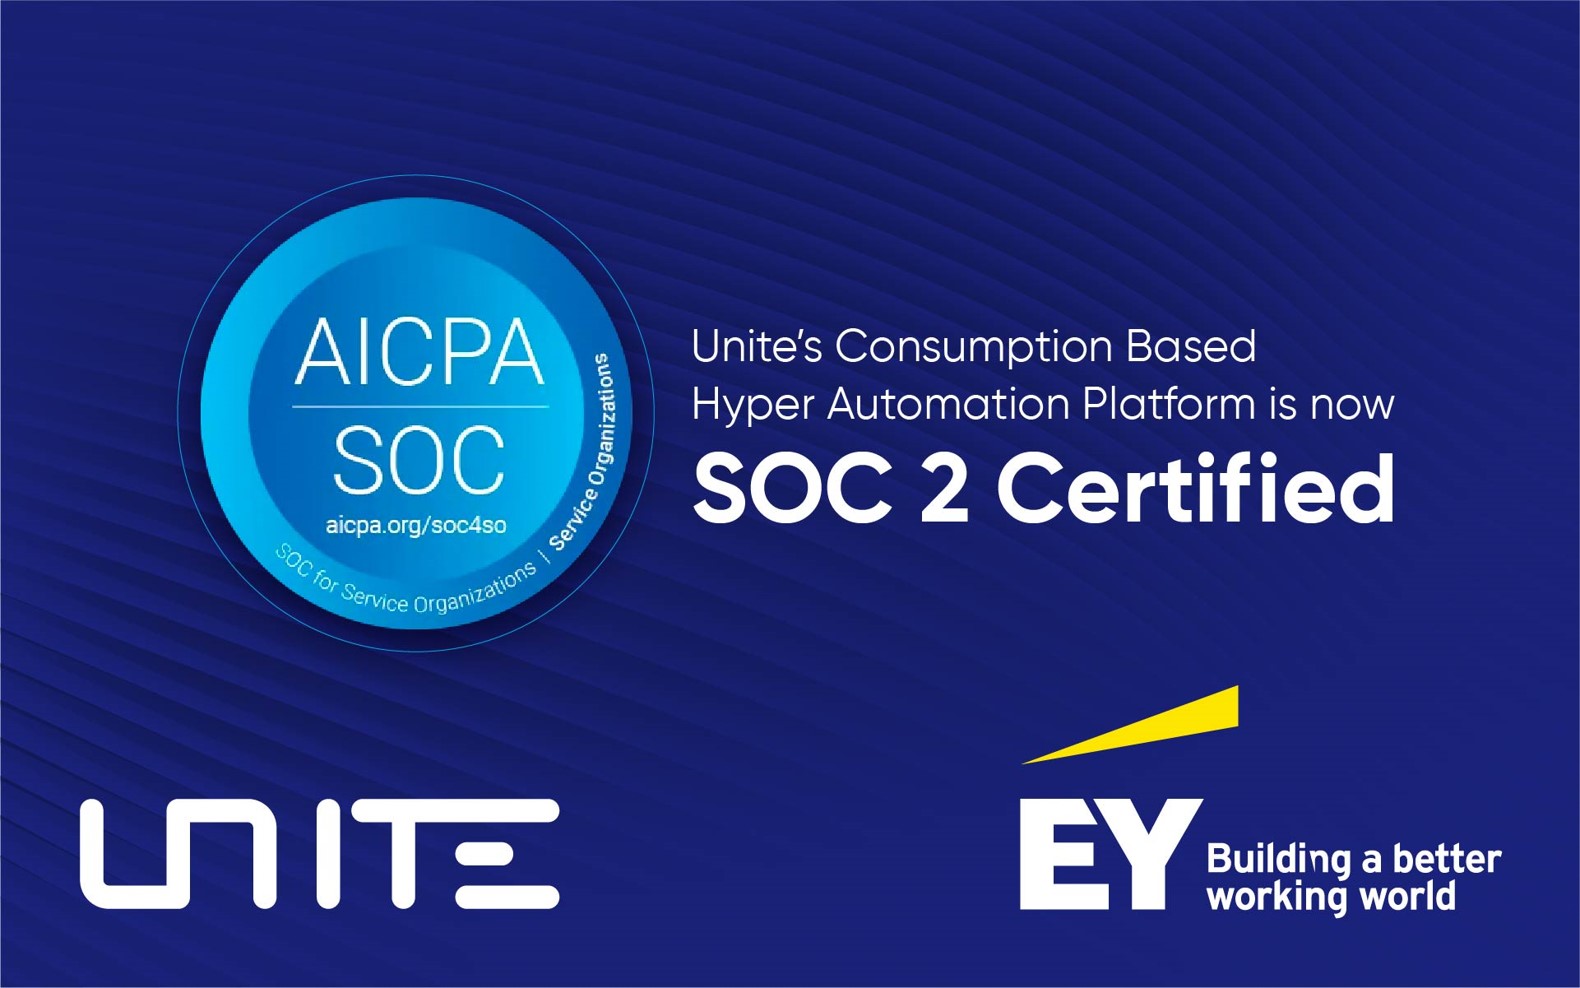 Unite's Consumption Based Hyper Automation Platform is now SOC 2 Certified